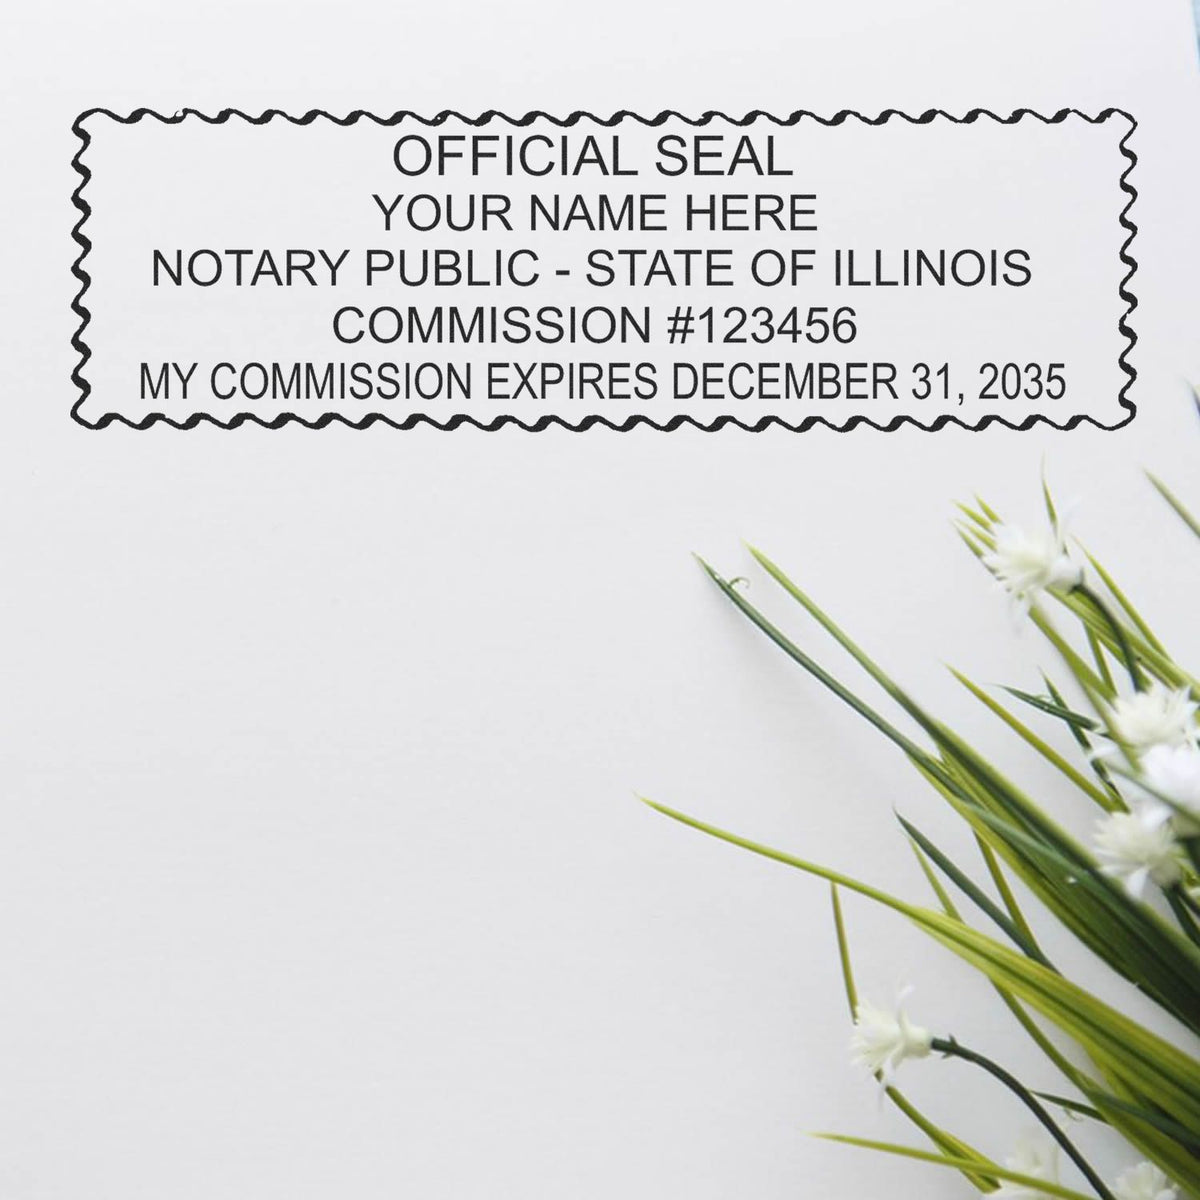 The Heavy-Duty Illinois Rectangular Notary Stamp stamp impression comes to life with a crisp, detailed photo on paper - showcasing true professional quality.